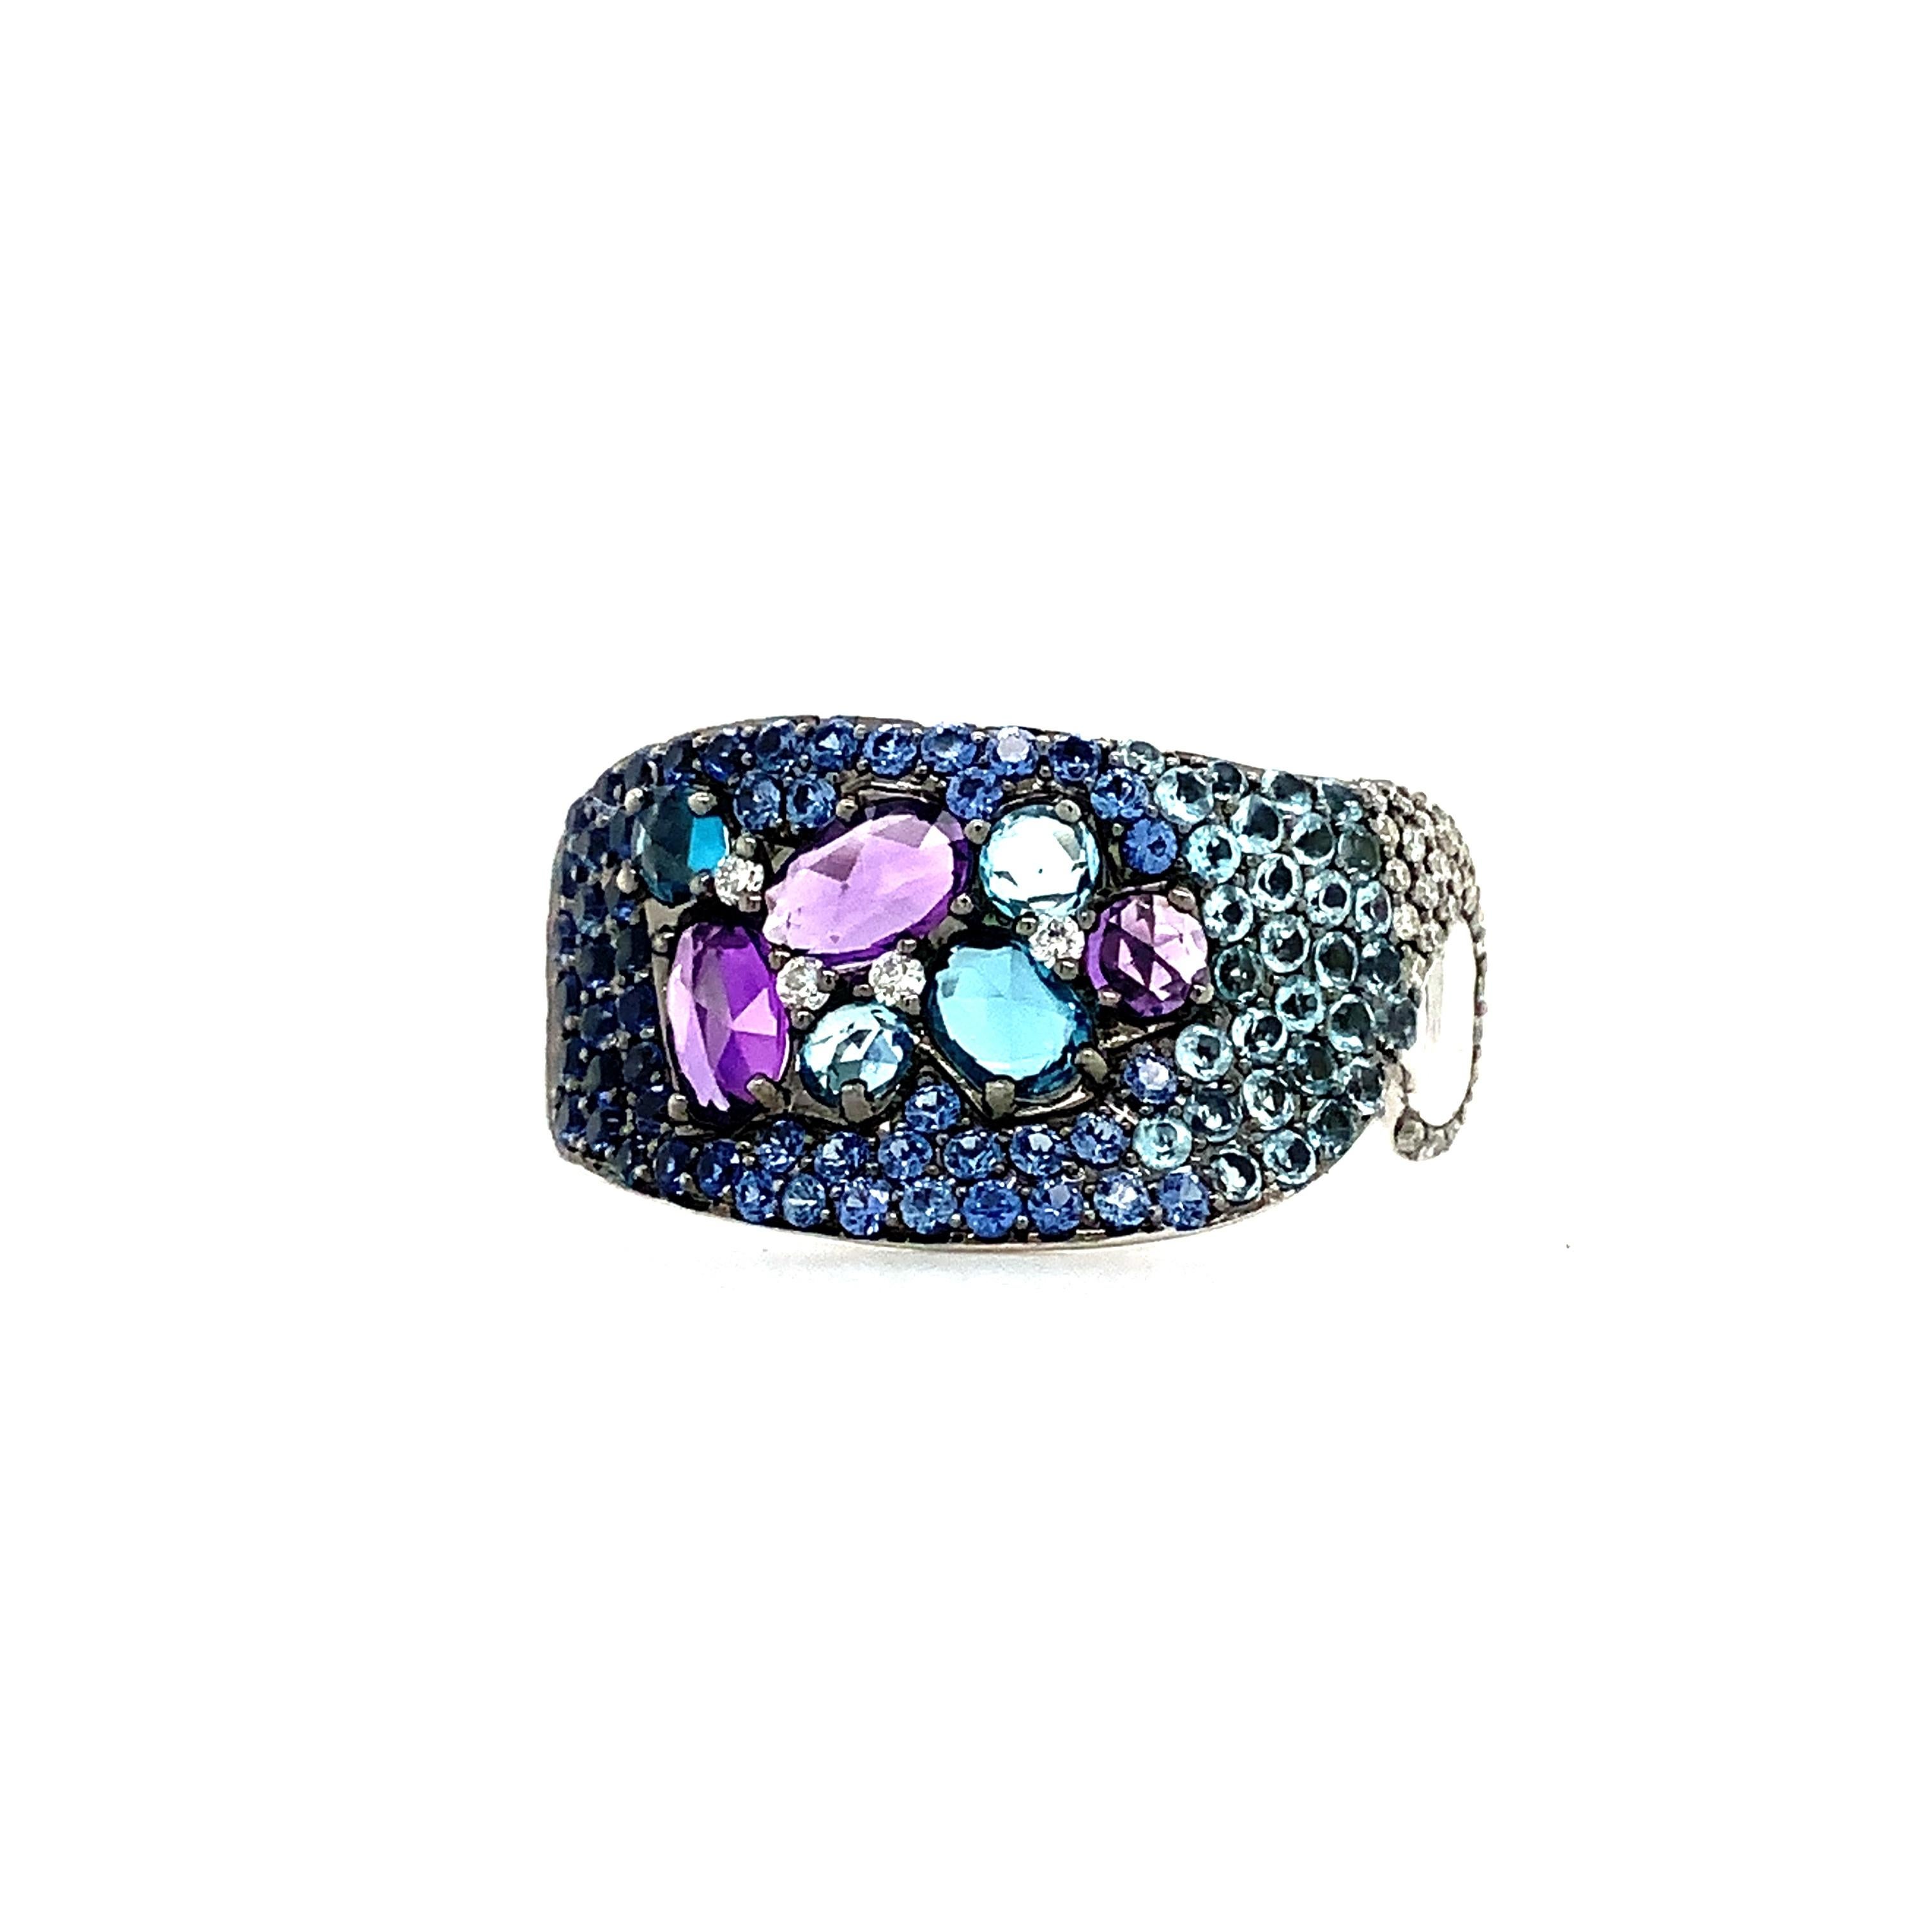 This ASBA Collection Ombre Pave Ring features Blue Sapphire, Diamond, Blue Topaz, and Amethyst stones set in 14K White Gold. With a width of 11.44mm and a depth of 2.16mm, the total carat weight of the ring is 2.31ctw, including 0.86ctw of